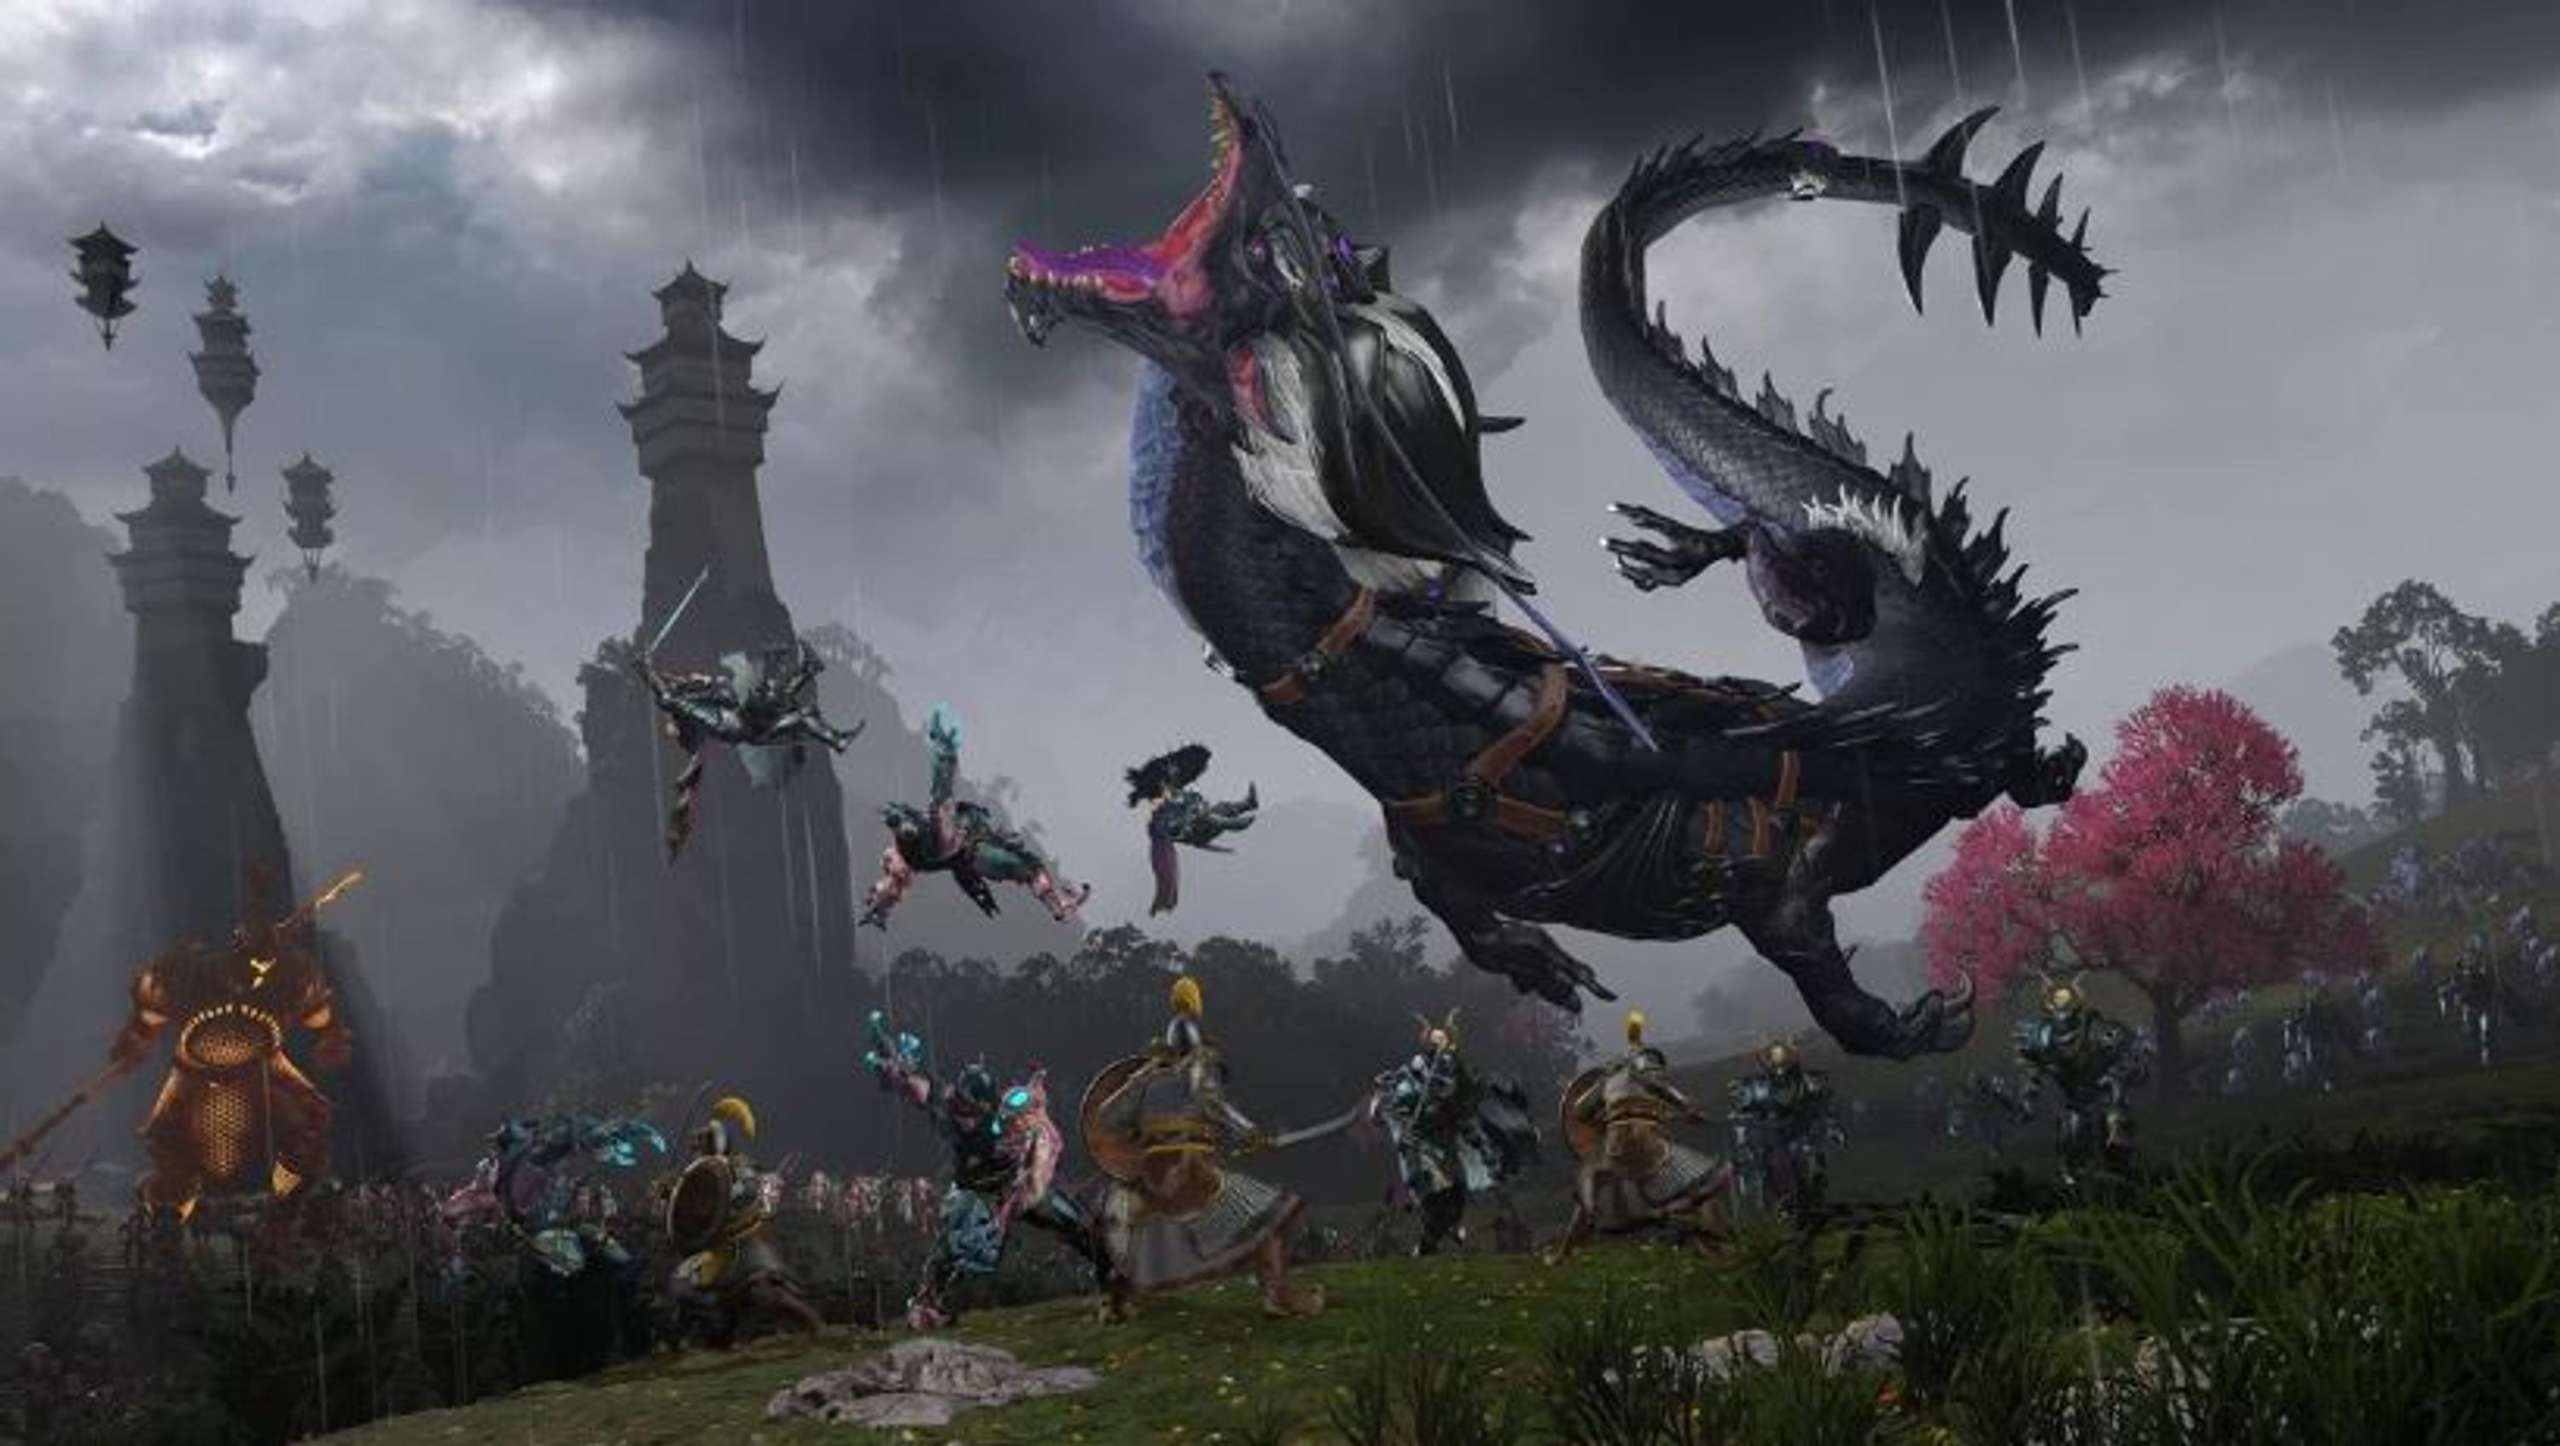 The First Of The Four New Factions That The Champions Of Chaos DLC For Total War: Warhammer 3 Will Introduce Has Been Unveiled By Creative Assembly